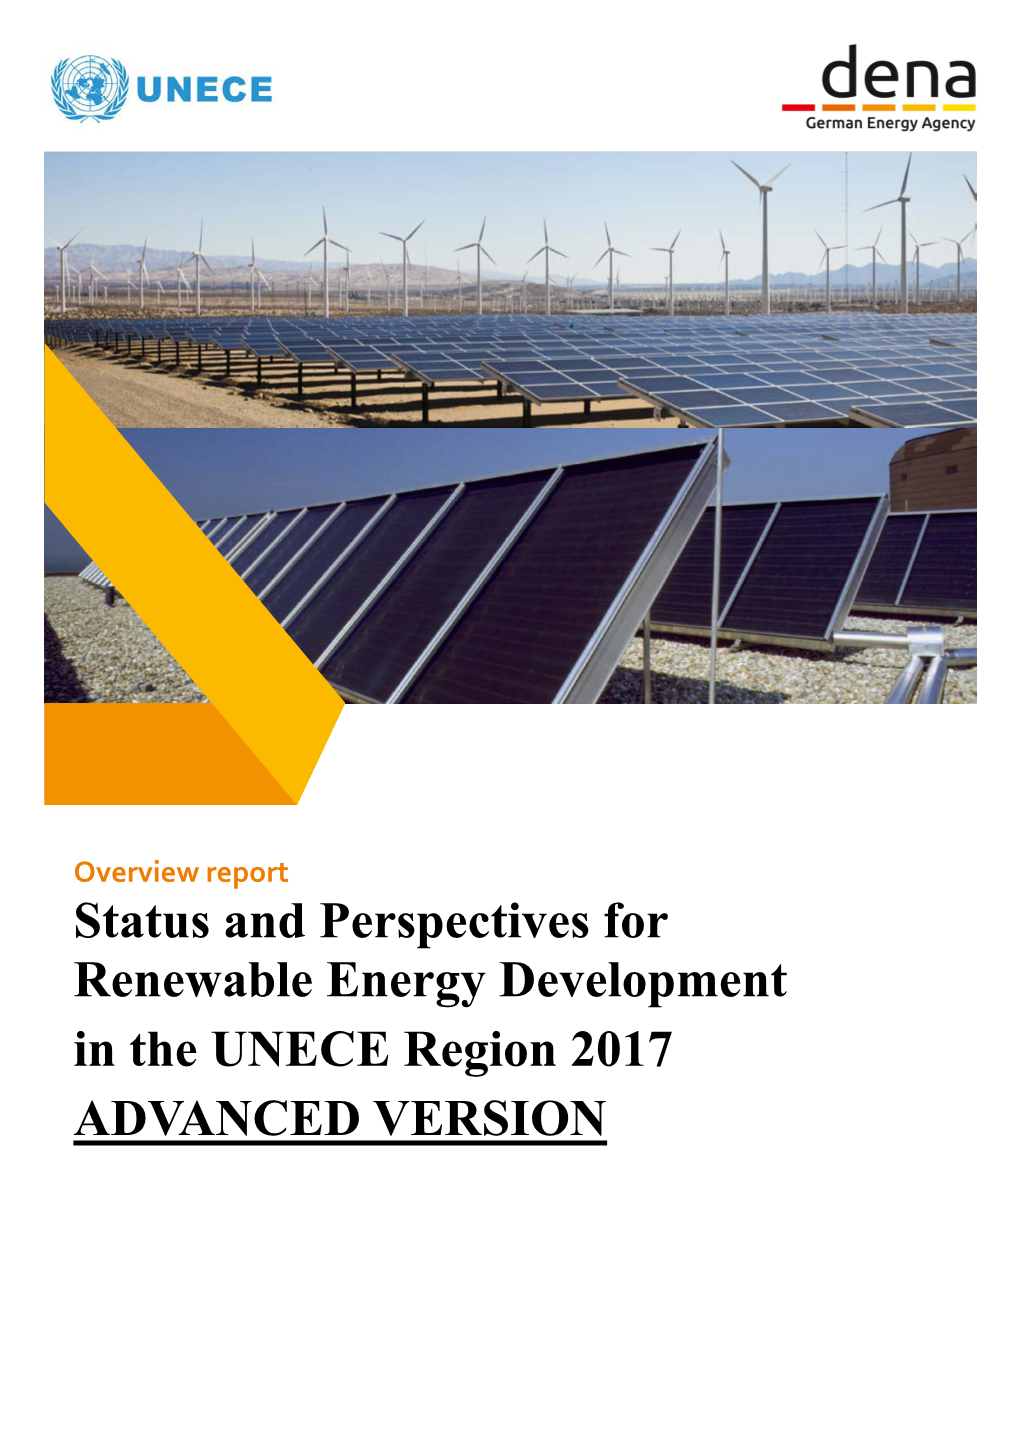 Status and Perspectives for Renewable Energy Development in the UNECE Region 2017 ADVANCED VERSION Imprint